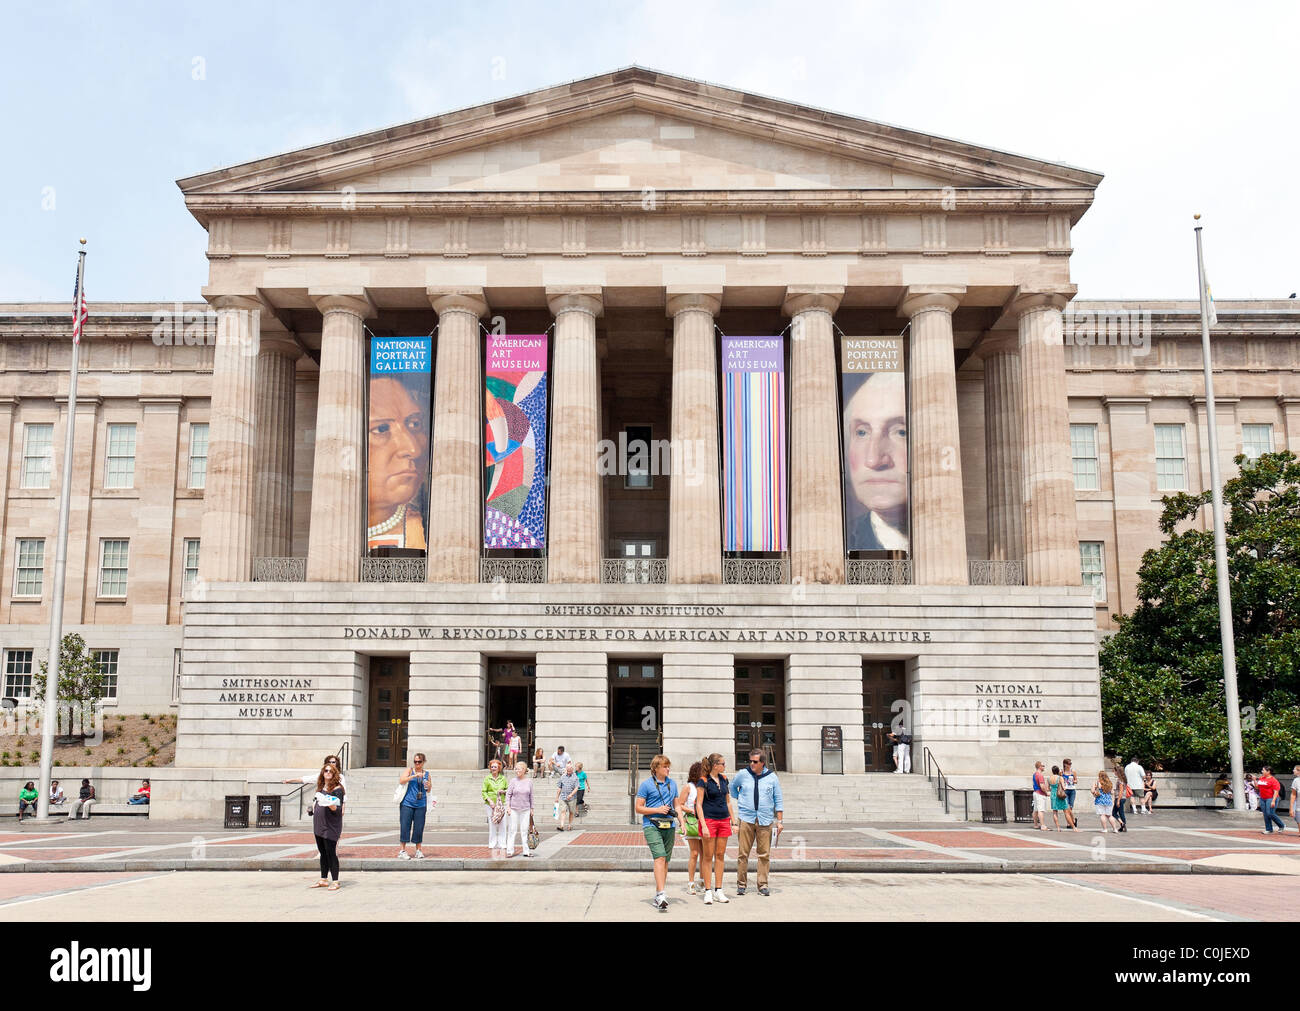 The National Portrait Gallery in Washington, D.C. Stock Photo